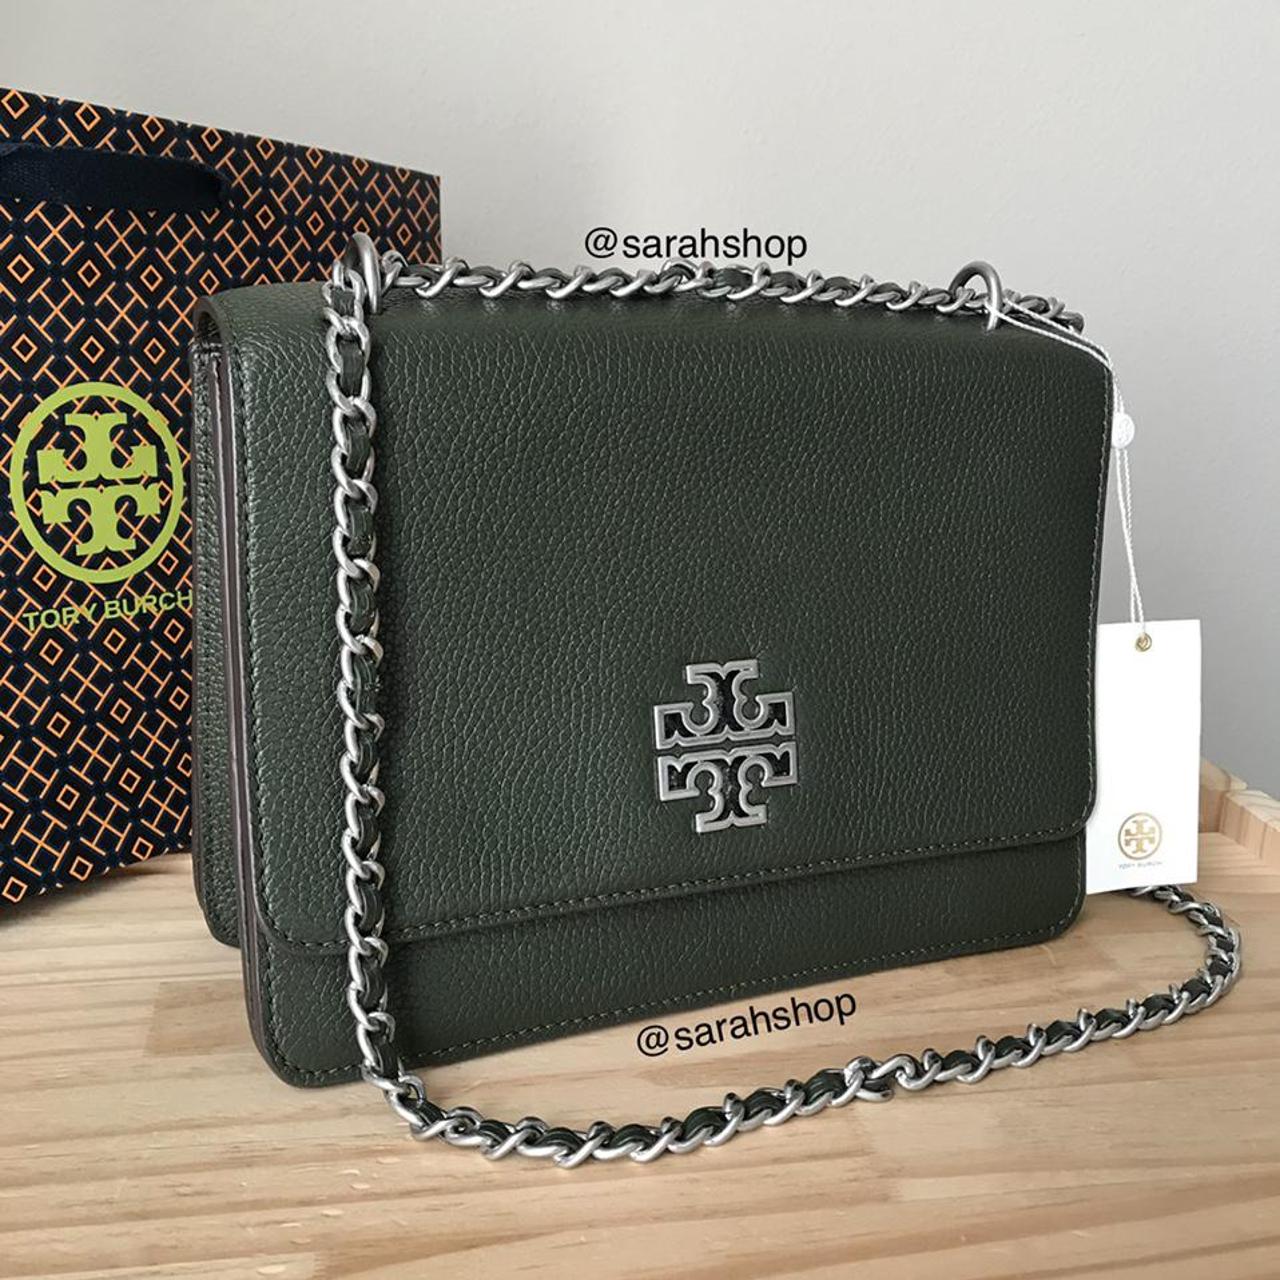 Carryall bag: The Gemini Link Tote by Tory Burch is the perfect everyday...  | Tory burch tote, Coffee date outfits, Popular handbags